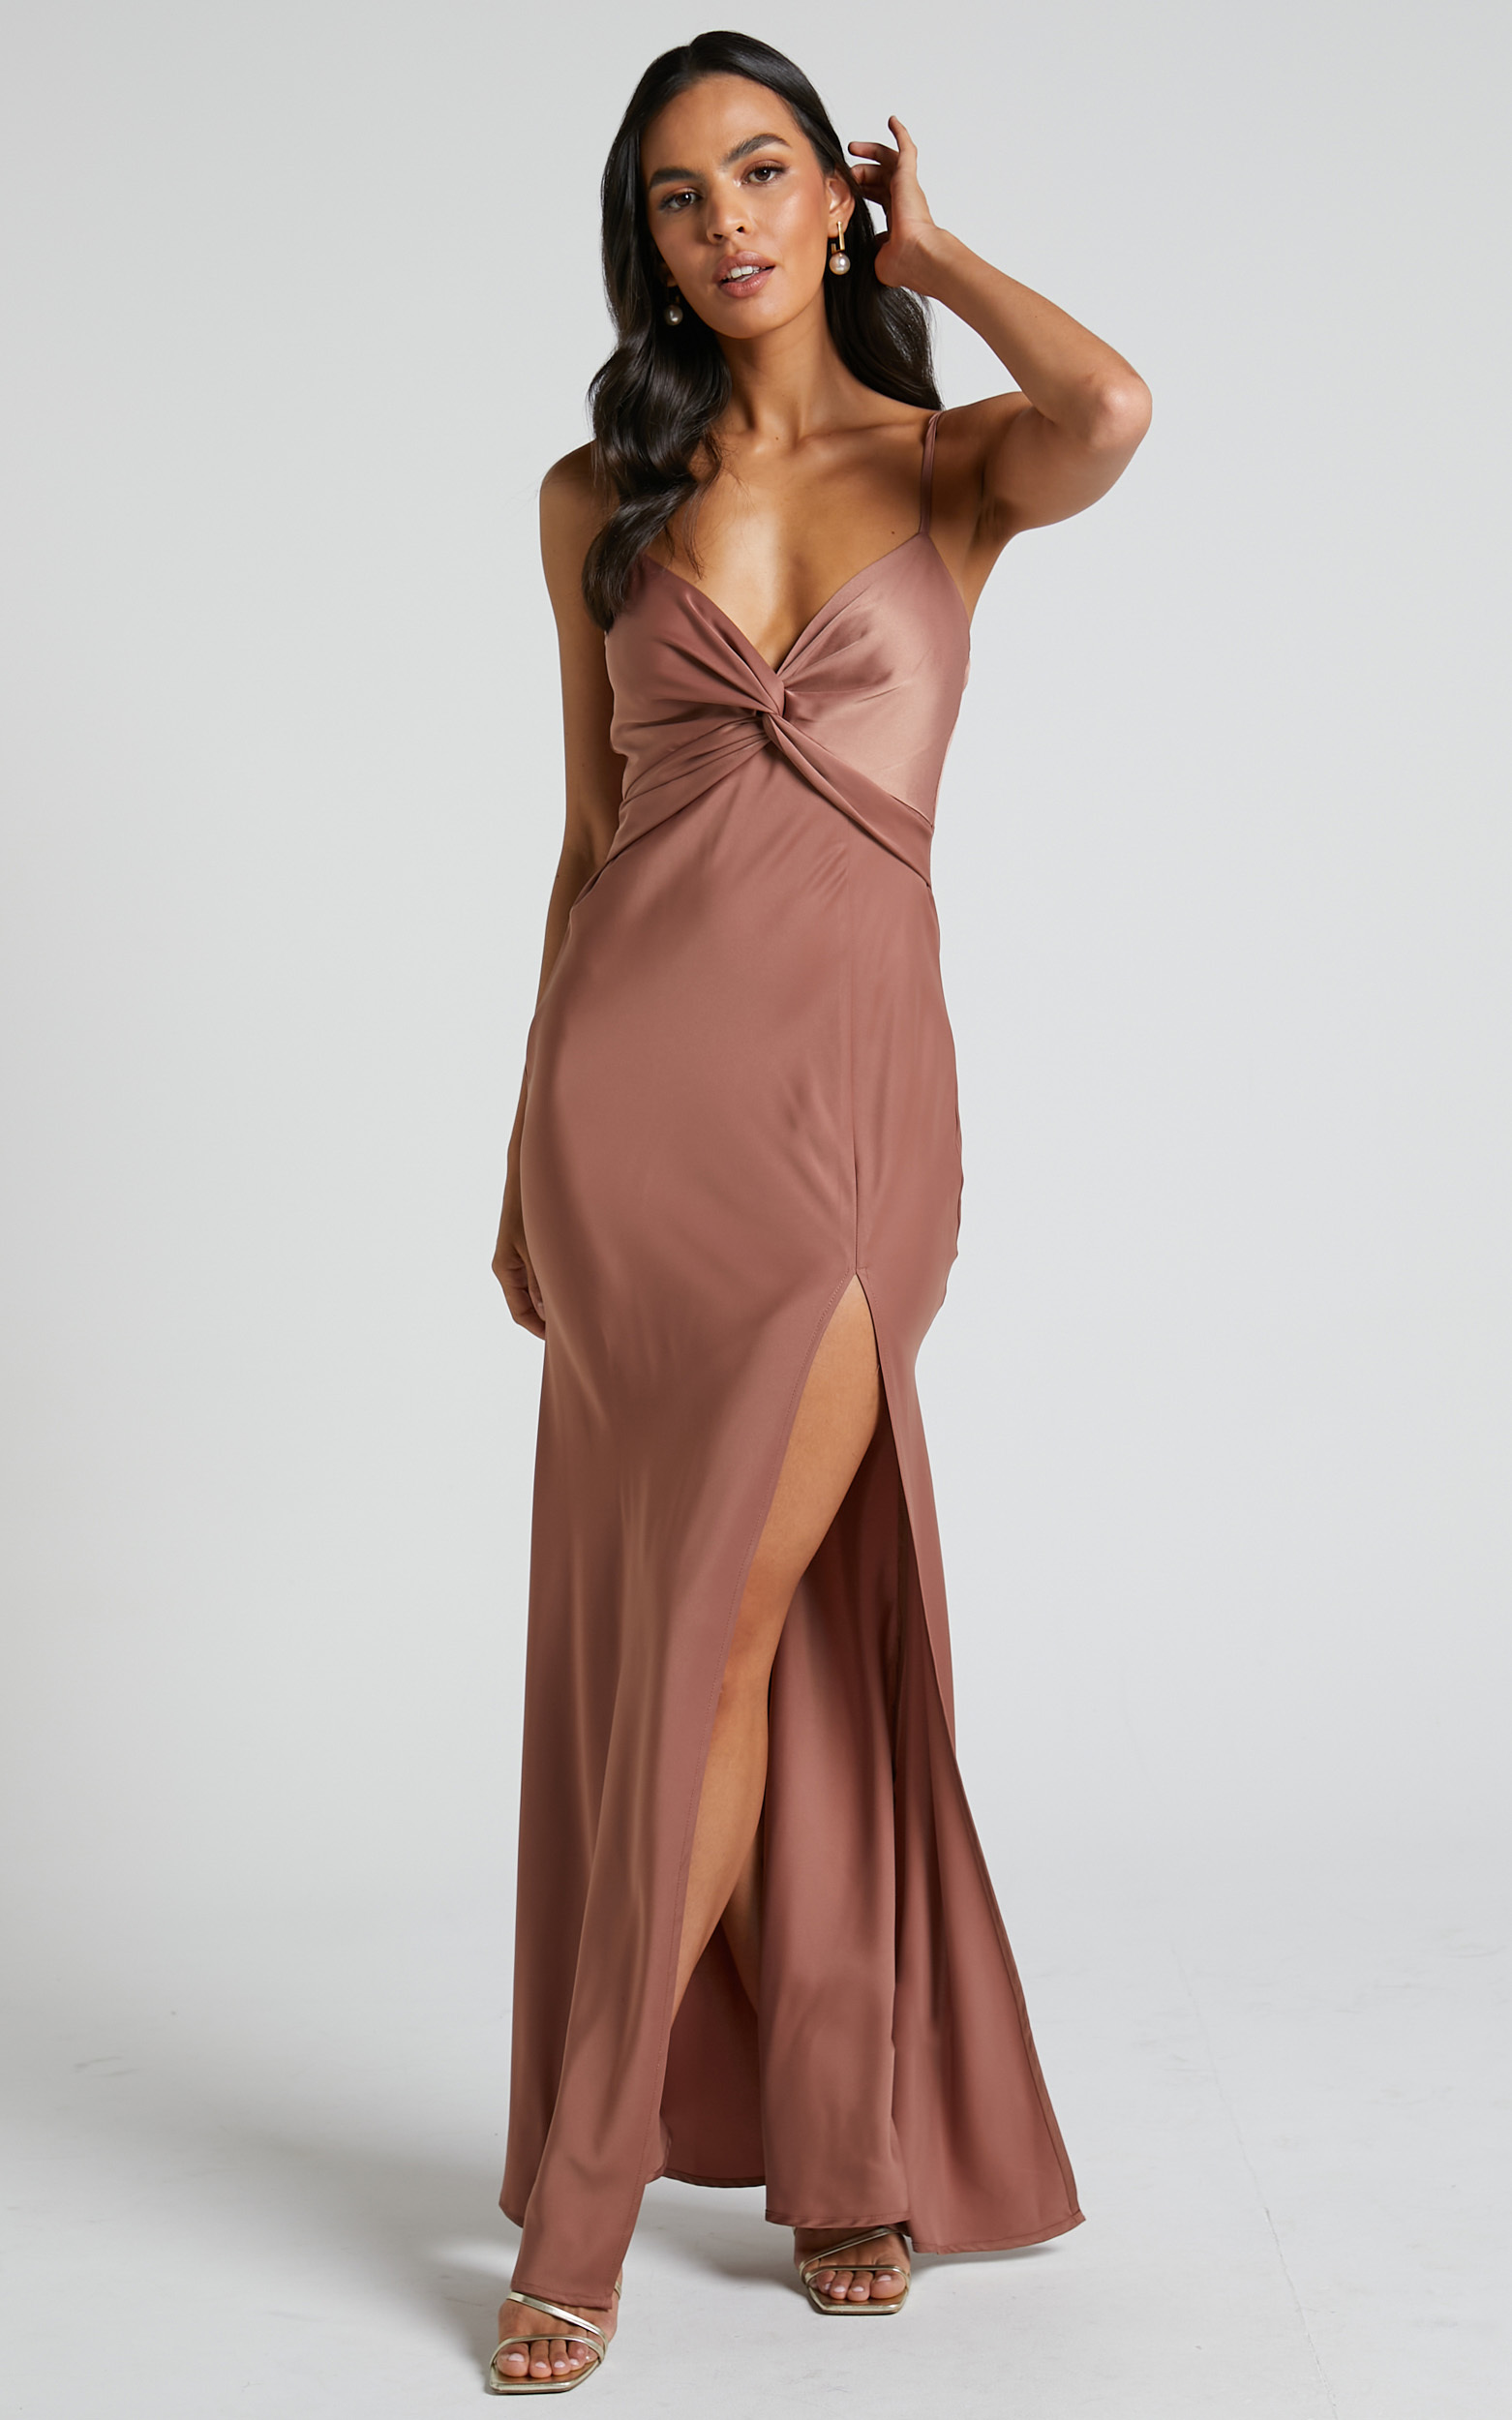 Gemalyn Maxi Dress - Twist Front Thigh Split Dress in Dusty Rose - 04, PNK3, hi-res image number null